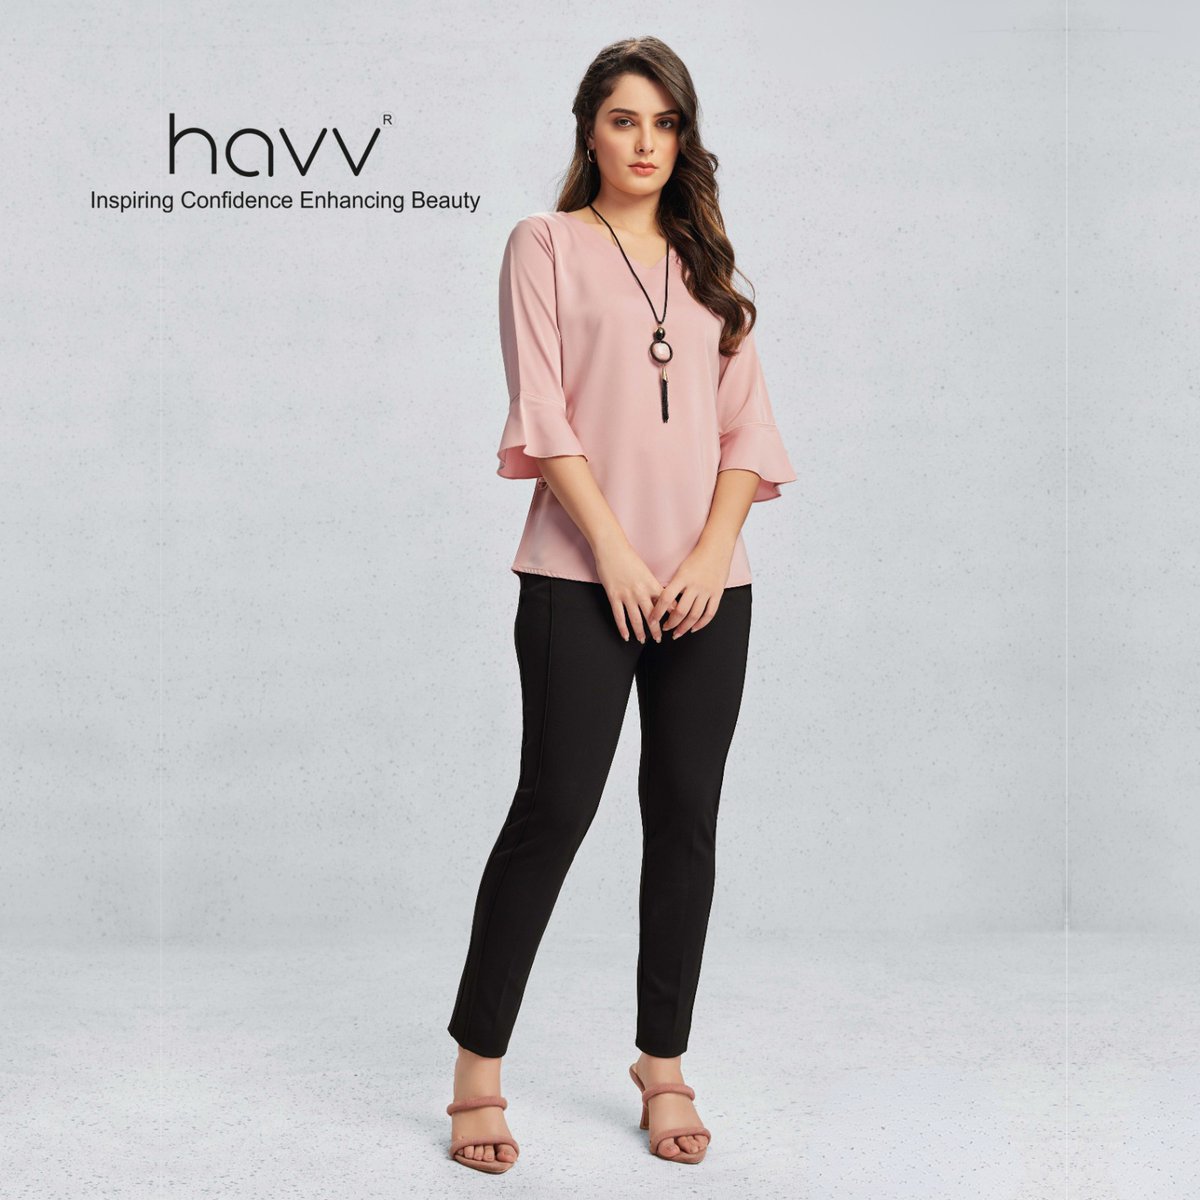 Putting my best leg forward. Ready for whatever comes my way.

#WesternTopTrends #RanchReady #WesternBlouse #CowgirlFashion #TopOffTheRange #StylishShirts #FrontierFashion #TopNotchWestern #RodeoReady #WesternChic #havv